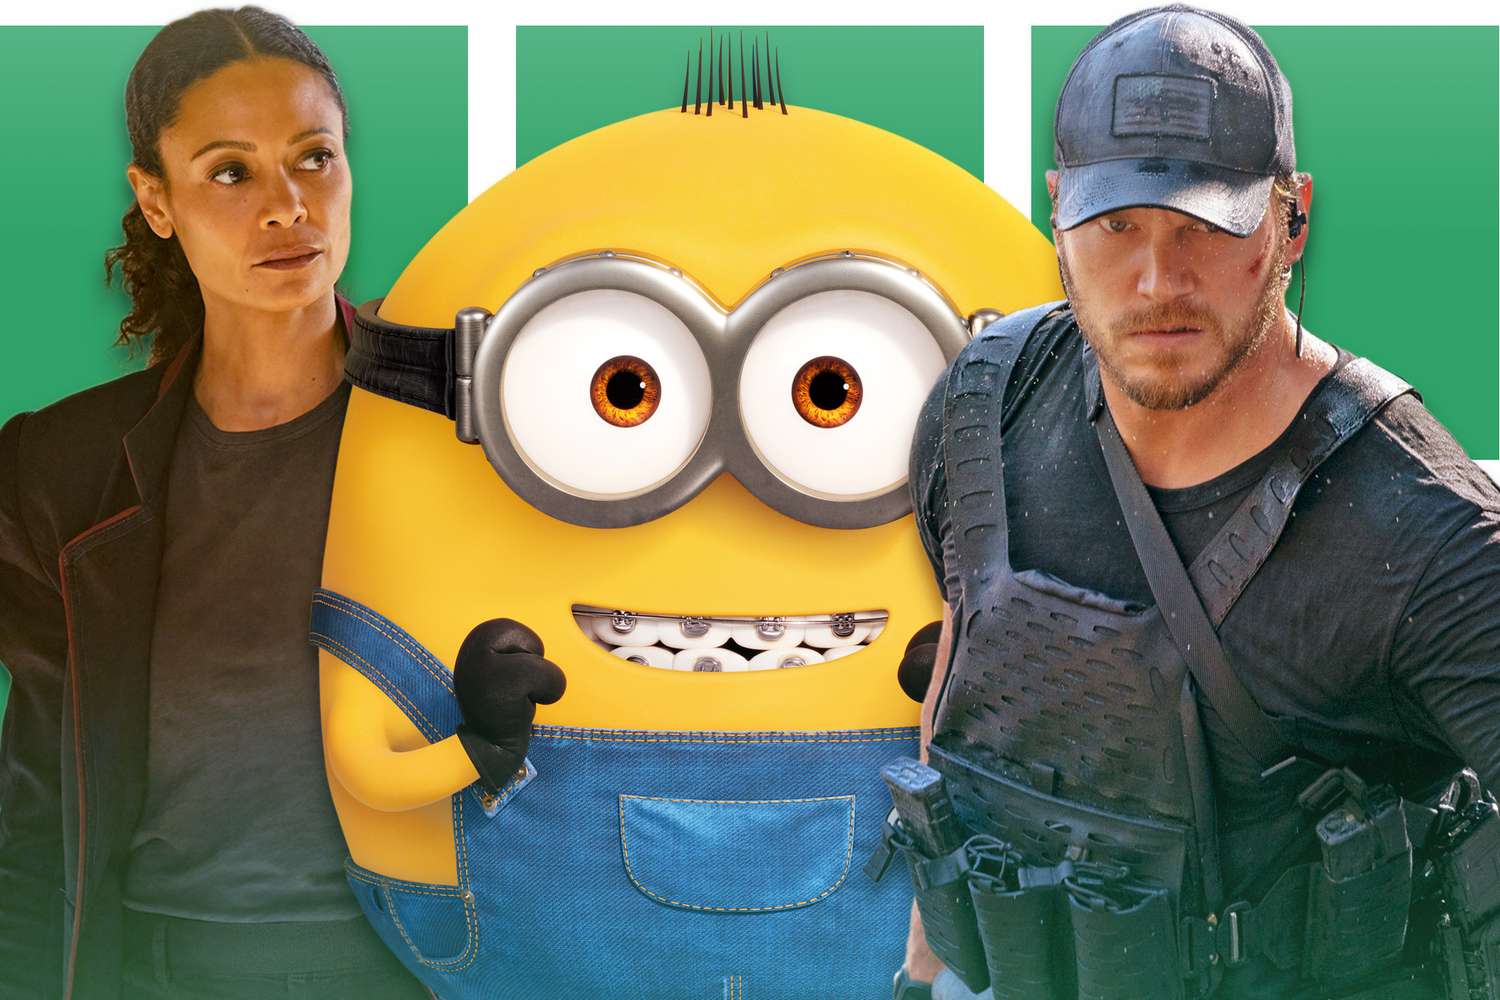 Musts & Misses: 'Minions: The Rise of Gru' is far from despicable, but new season of 'Westworld' is buggy